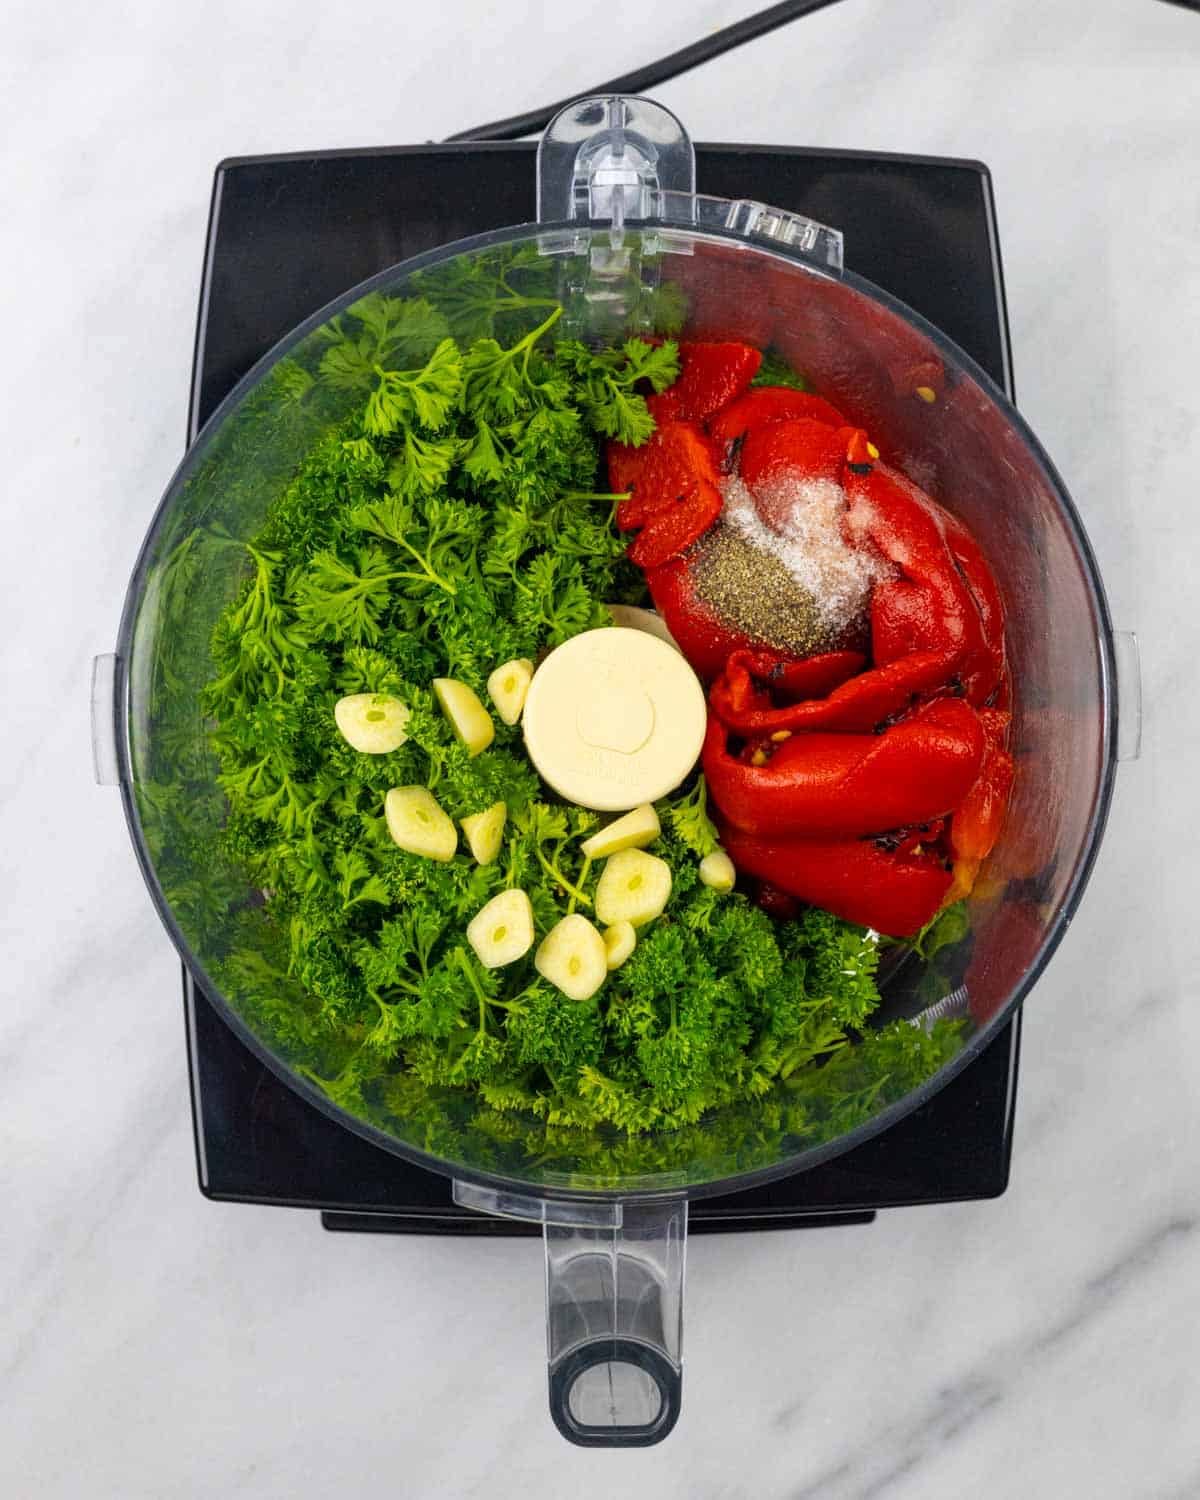 Looking down into food processor bowl at chimichurri ingredients prior to blending.